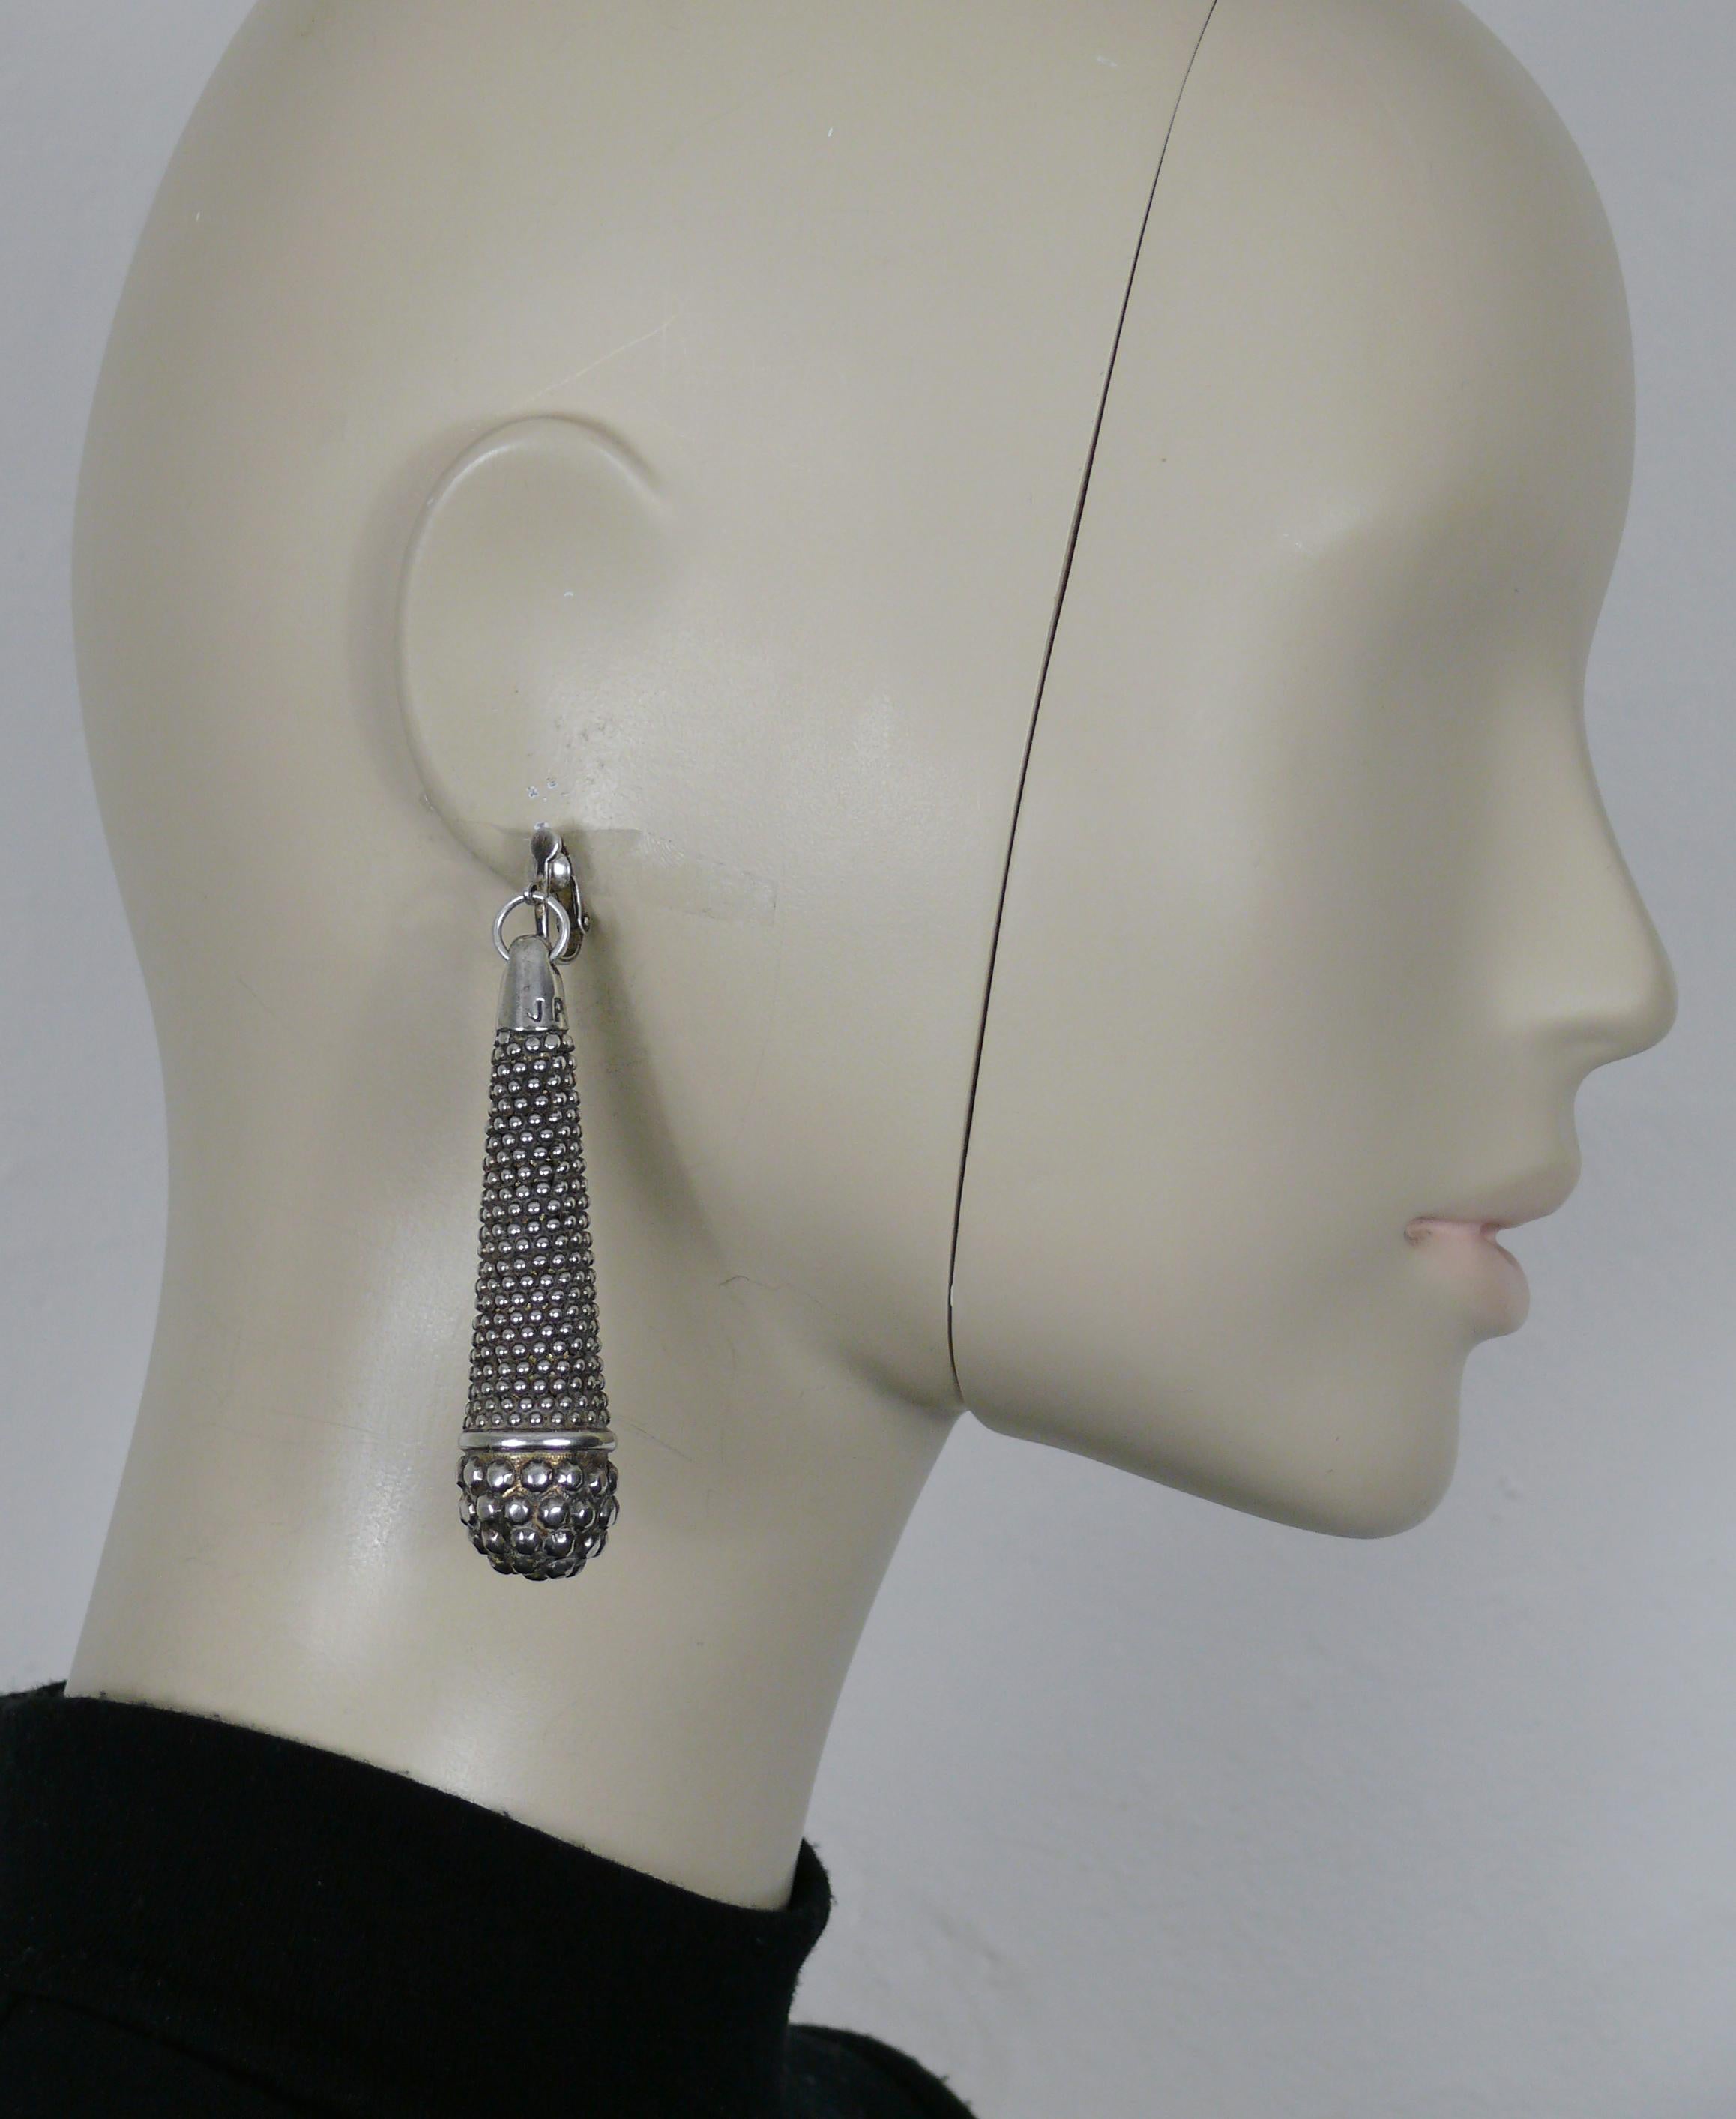 JEAN PAUL GAULTIER vintage massive antiqued silver tone ethnic inspired dangling earrings (clip-on) featuring a tubular drop form with bead pattern design.

Embossed JPG.

Indicative measurements : height approx. 7.2 cm (2.83 inches) / max. width